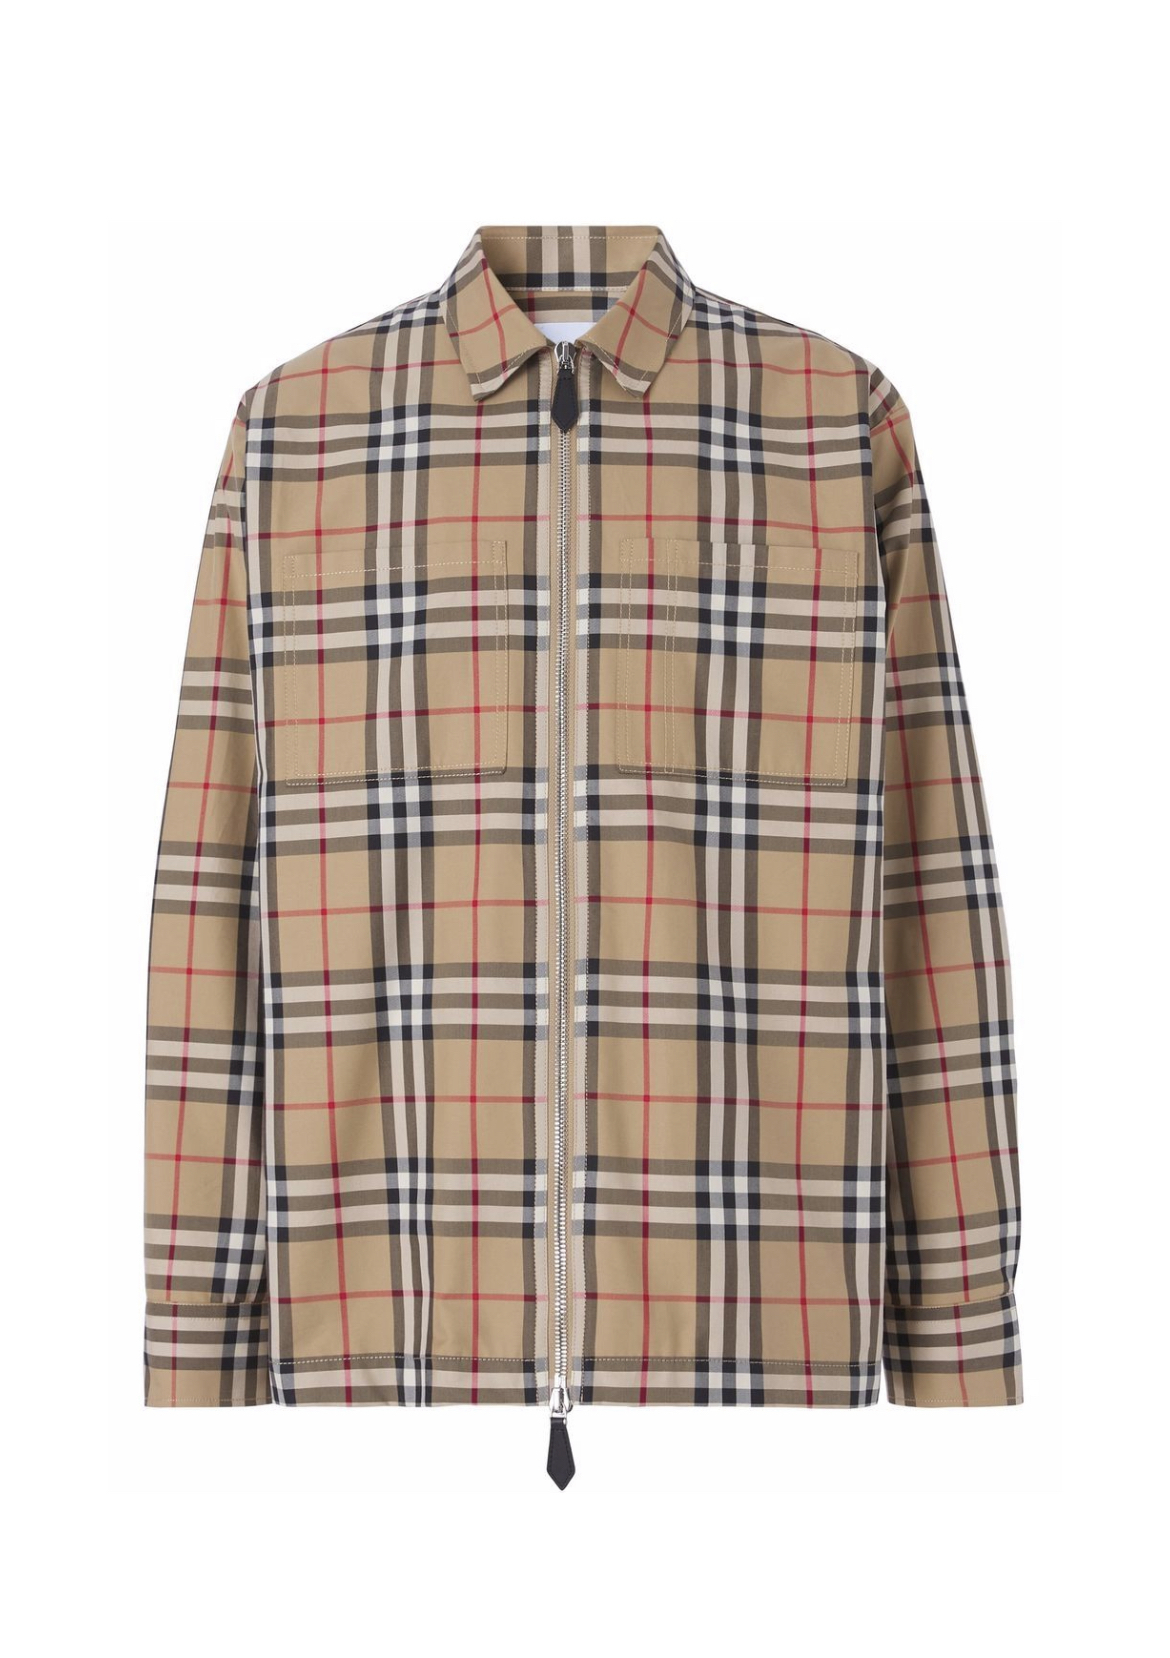 Burberry monster graphic print check zip up jacket